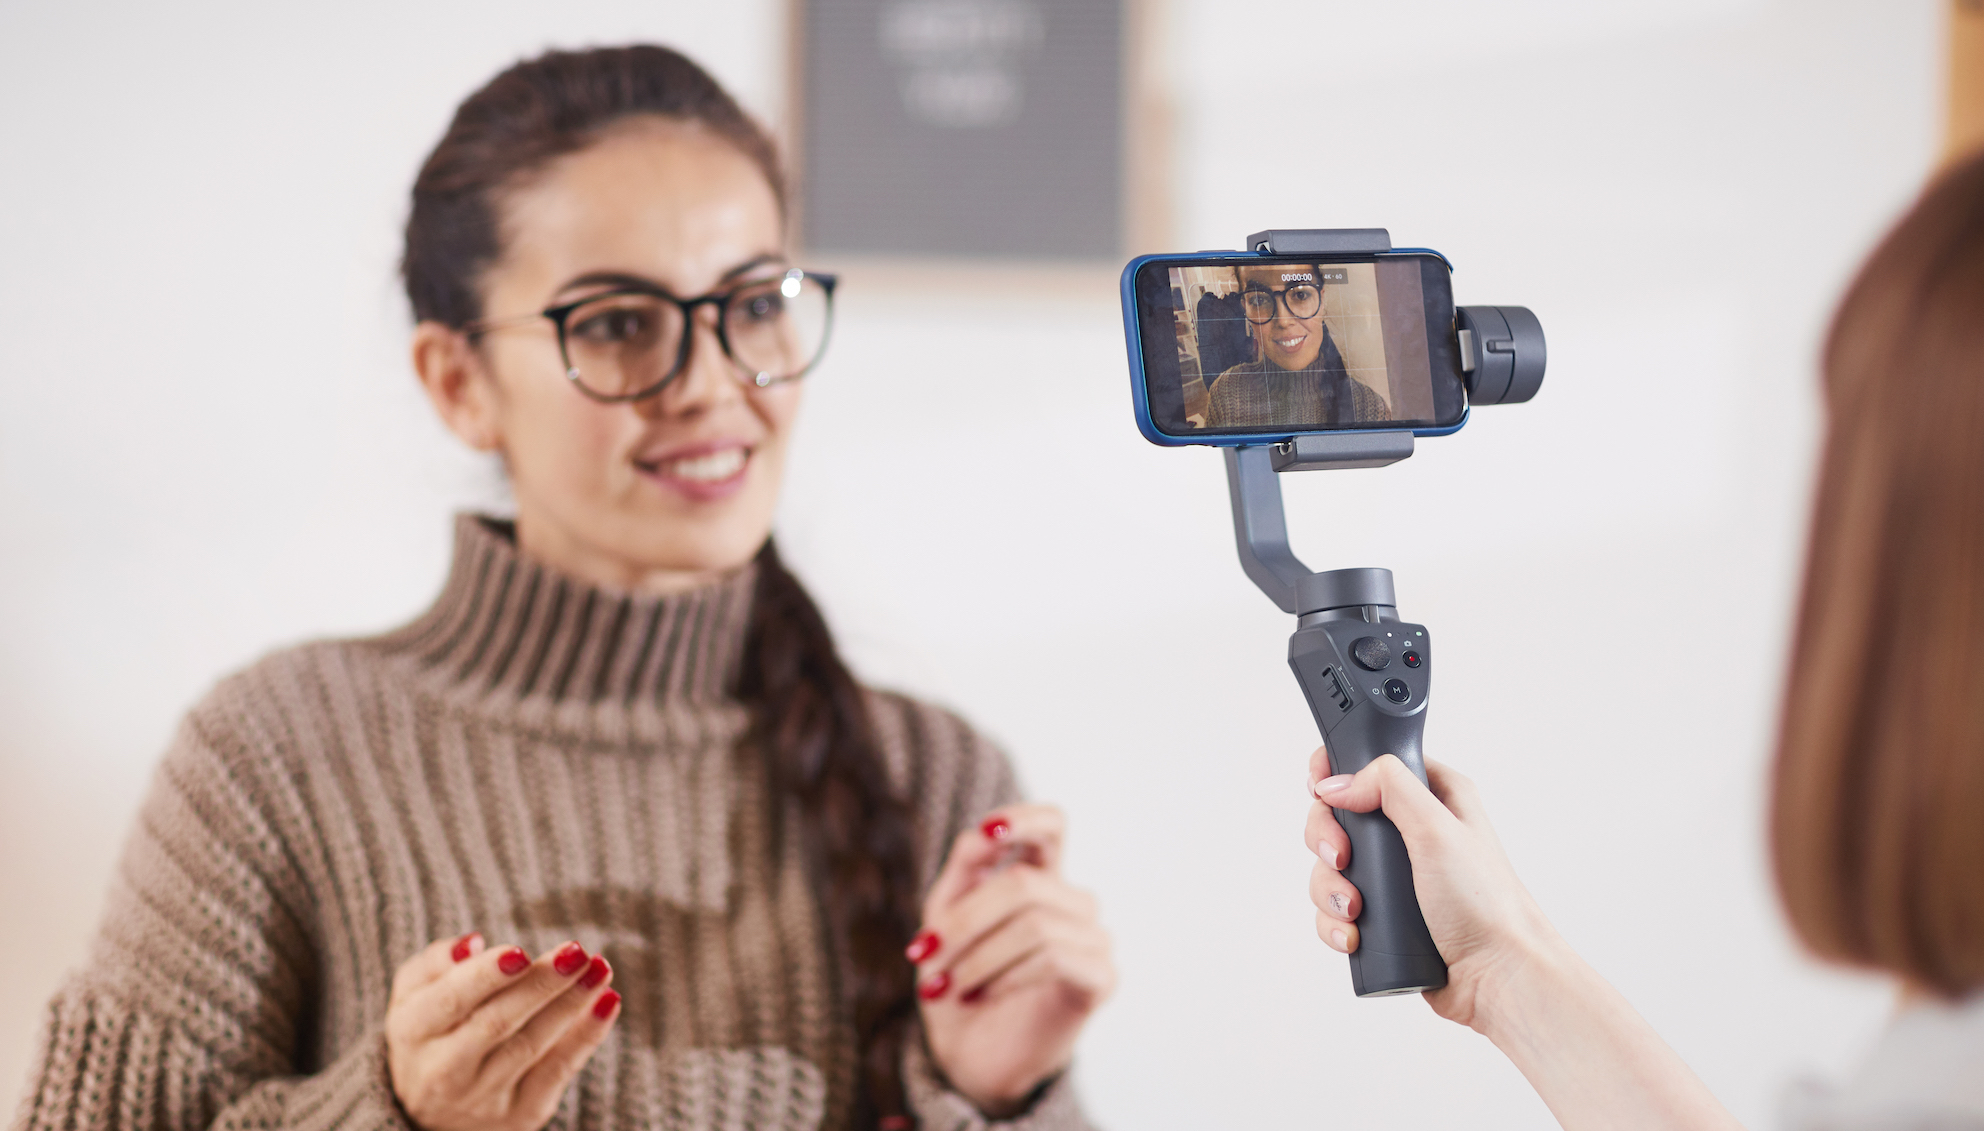 Cell phone video stabilizer for social media video